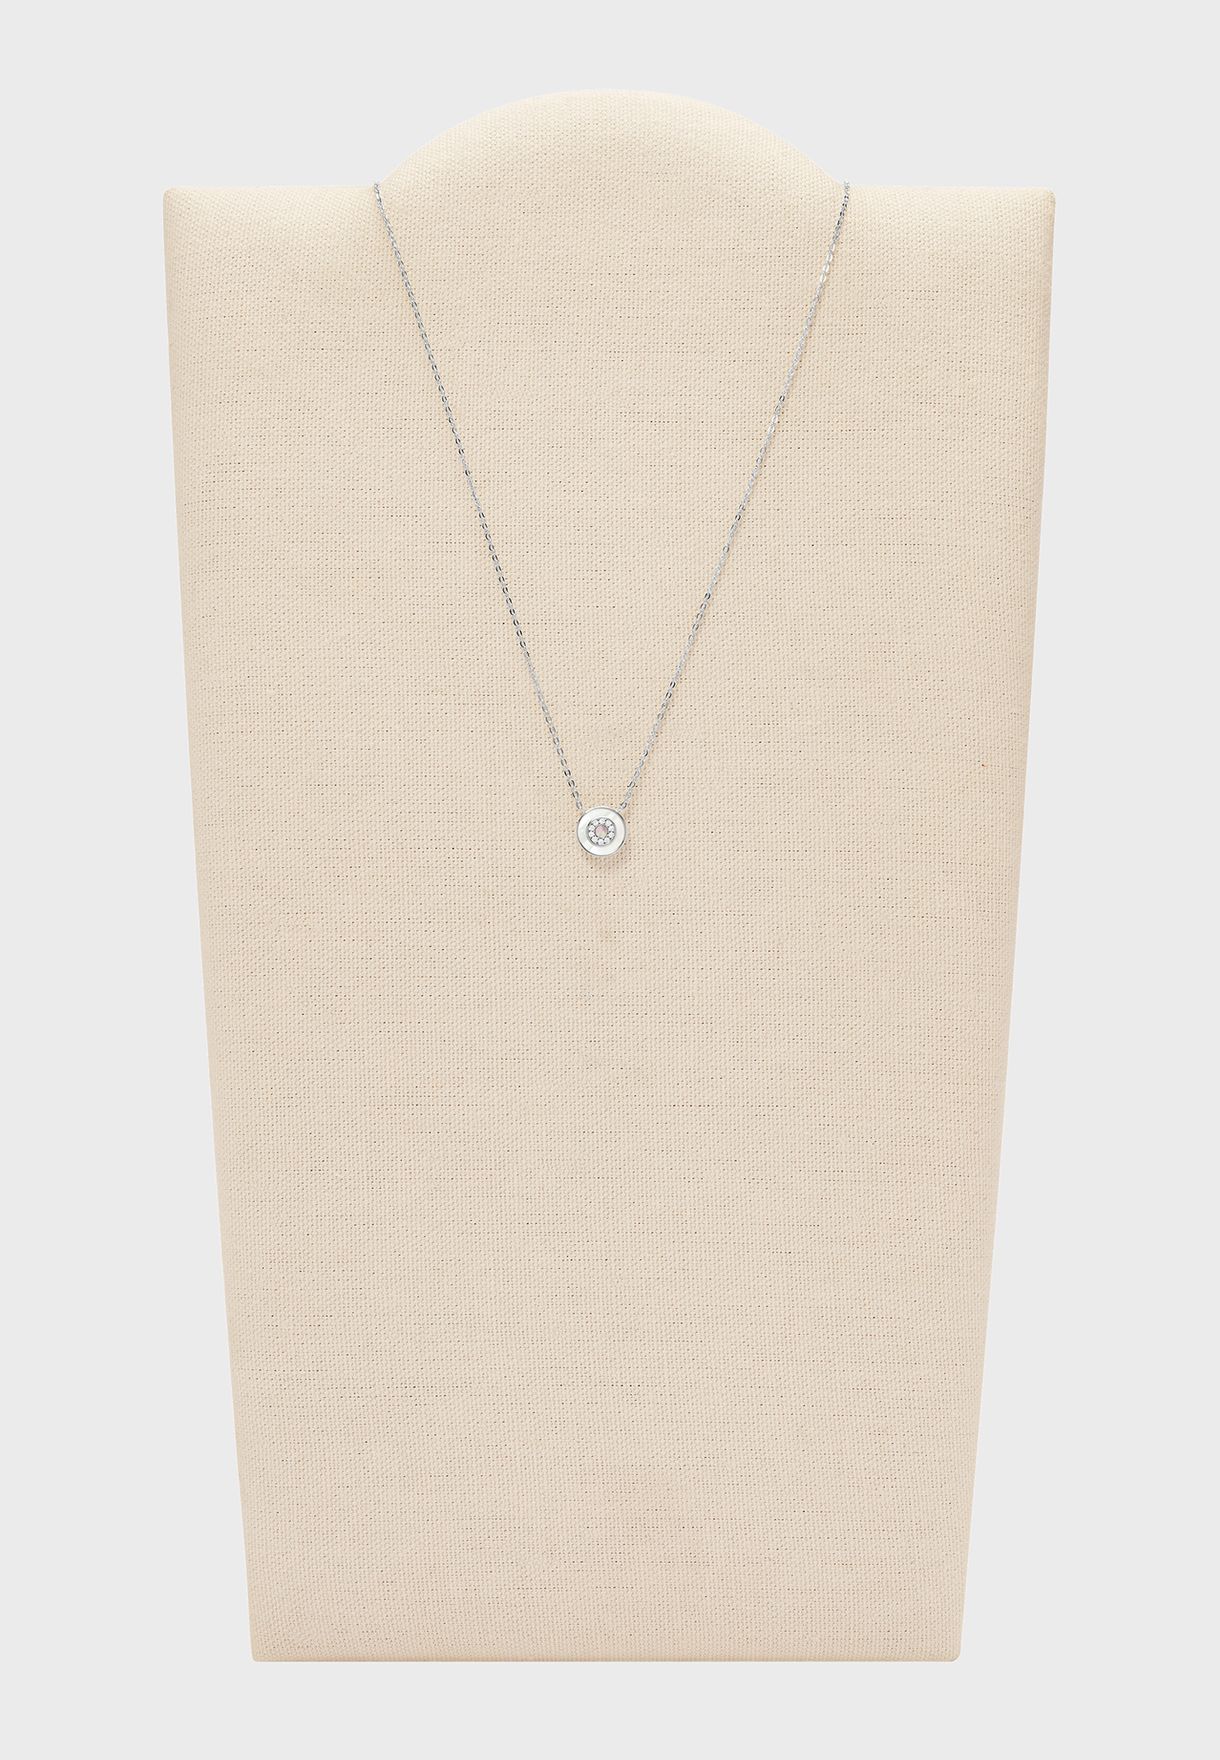 Casual Chain Necklace